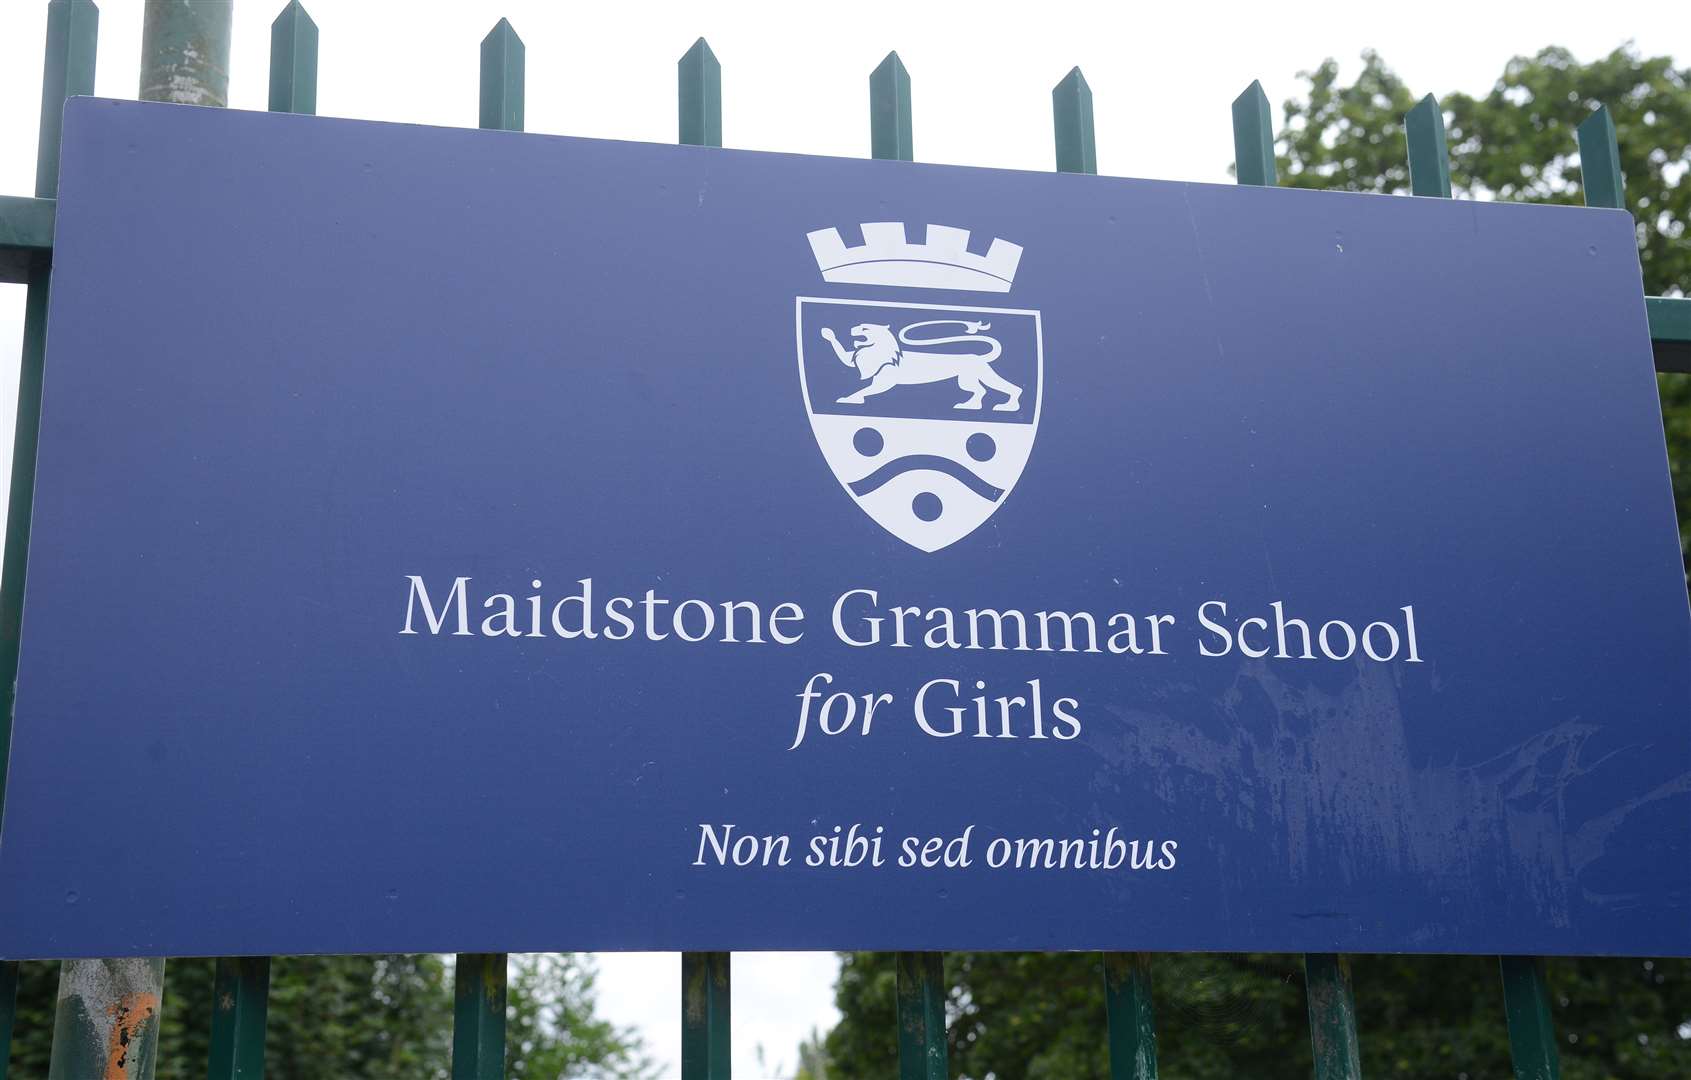 Carly Dear taught at Maidstone Grammar School for Girls Picture: Gary Browne